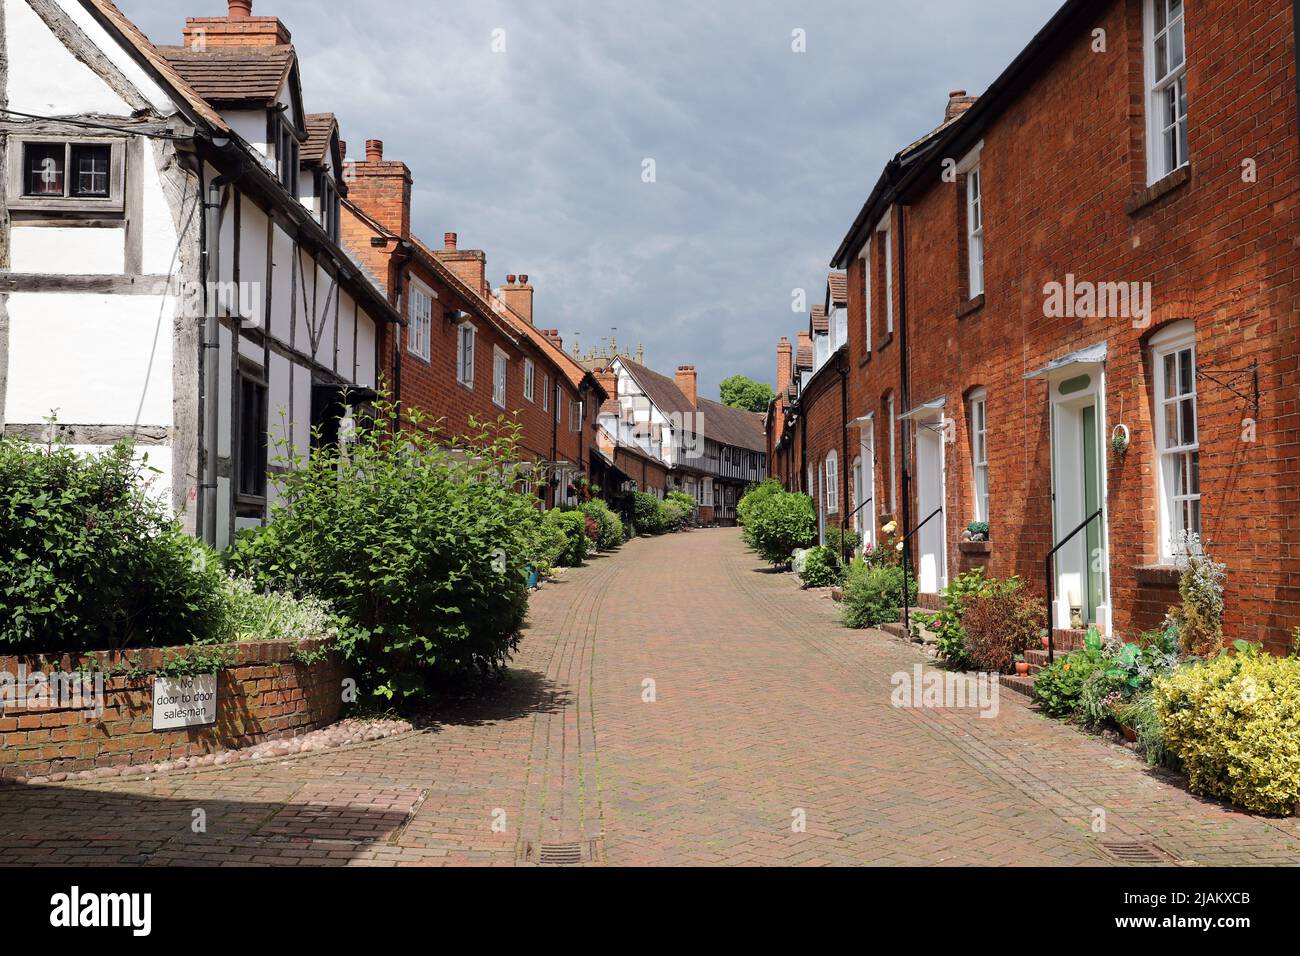 Malt Mill Lane, Alcester, Warwickshire. This street contains many listed buildings of the 16th and 18th centuries Stock Photo